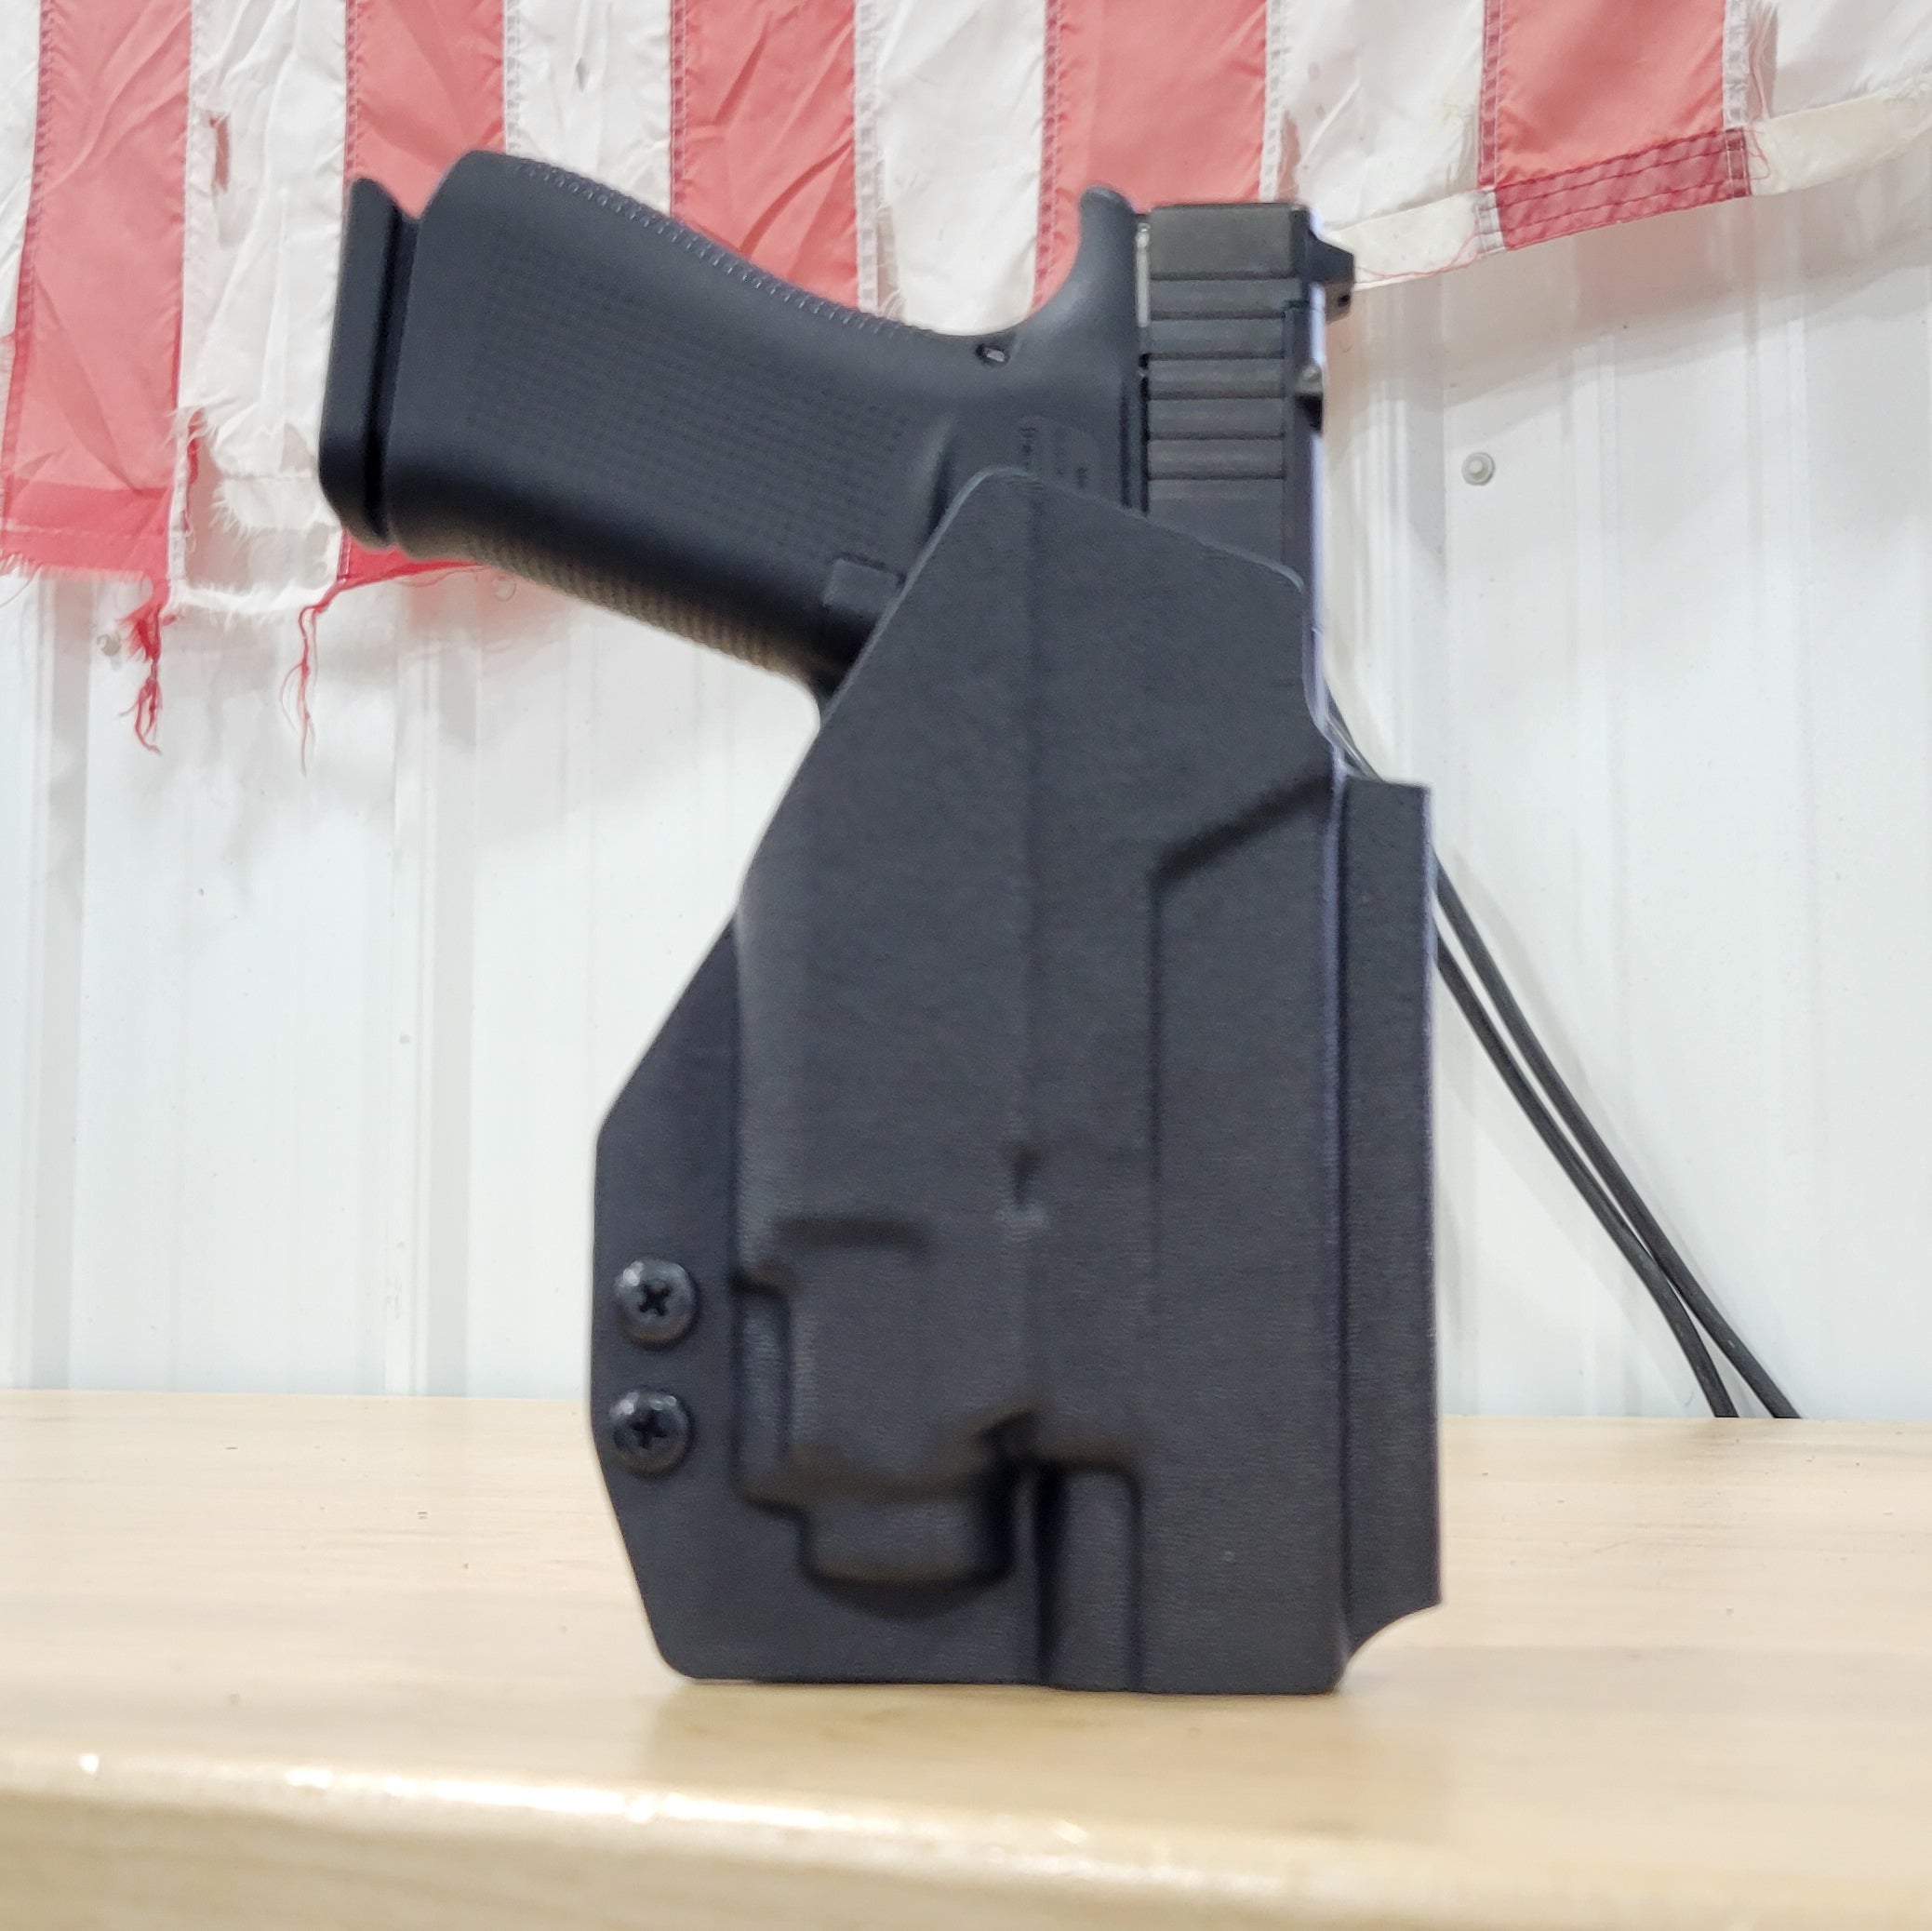 For the best Outside Waistband OWB Kydex Holster designed to fit the Glock 43X MOS, 48 MOS, 43X Rail, and 48 Rail pistols with Streamlight TLR-8 Sub, shop Four Brothers Holsters.  Full sweat guard, adjustable retention, smooth edges to reduce printing. Made in the USA. Open muzzle and cleared for red dot sights. TLR8 